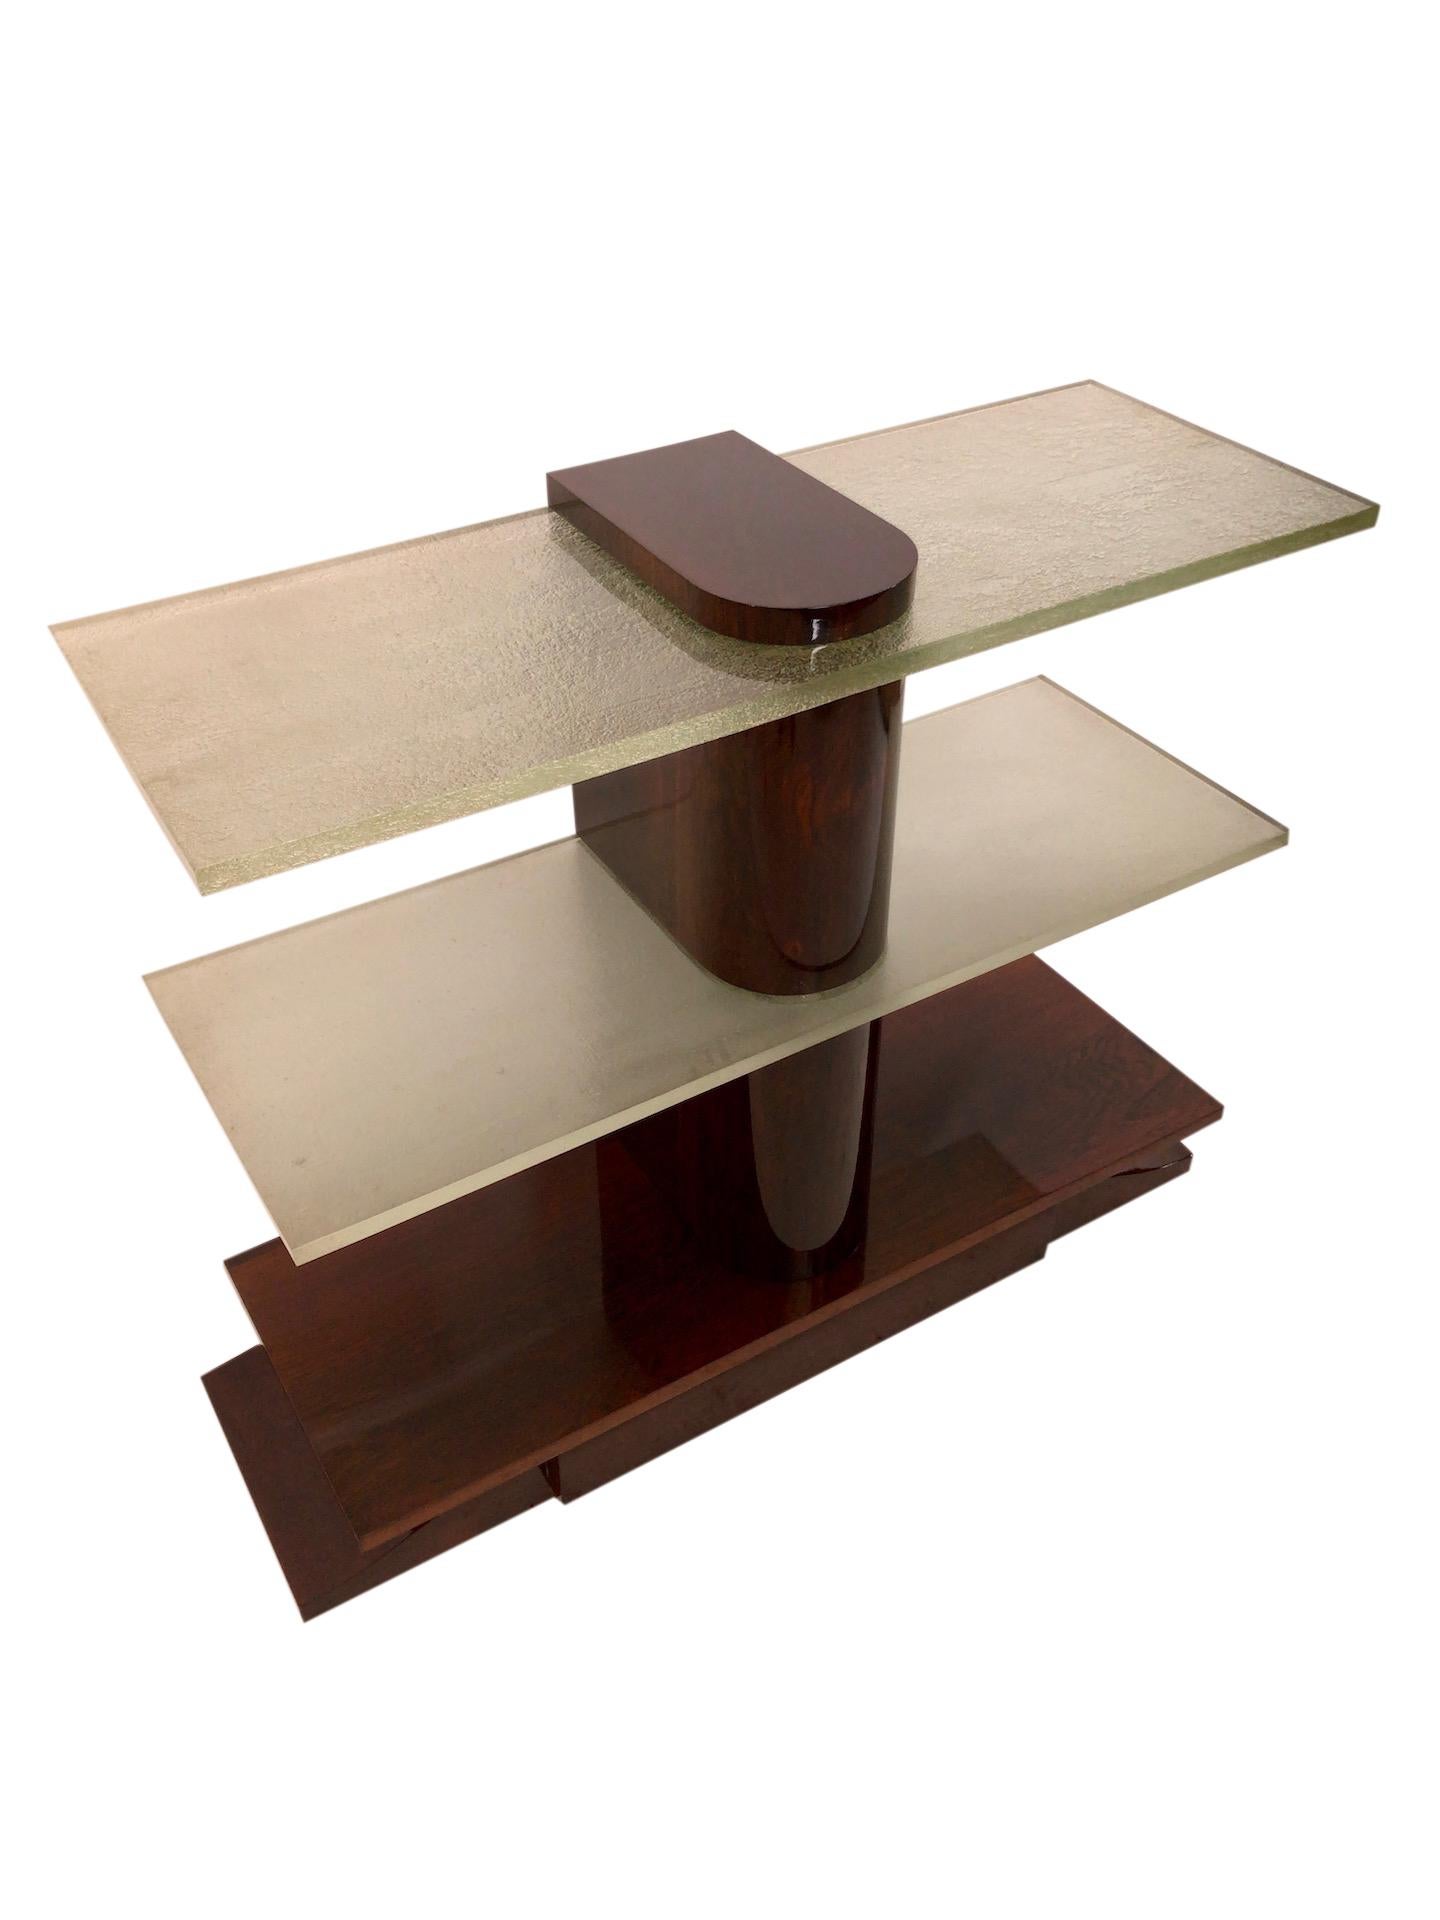 Mid-20th Century Art Deco Console Table with Saint Gobain Glass and Real Wood Veneer For Sale